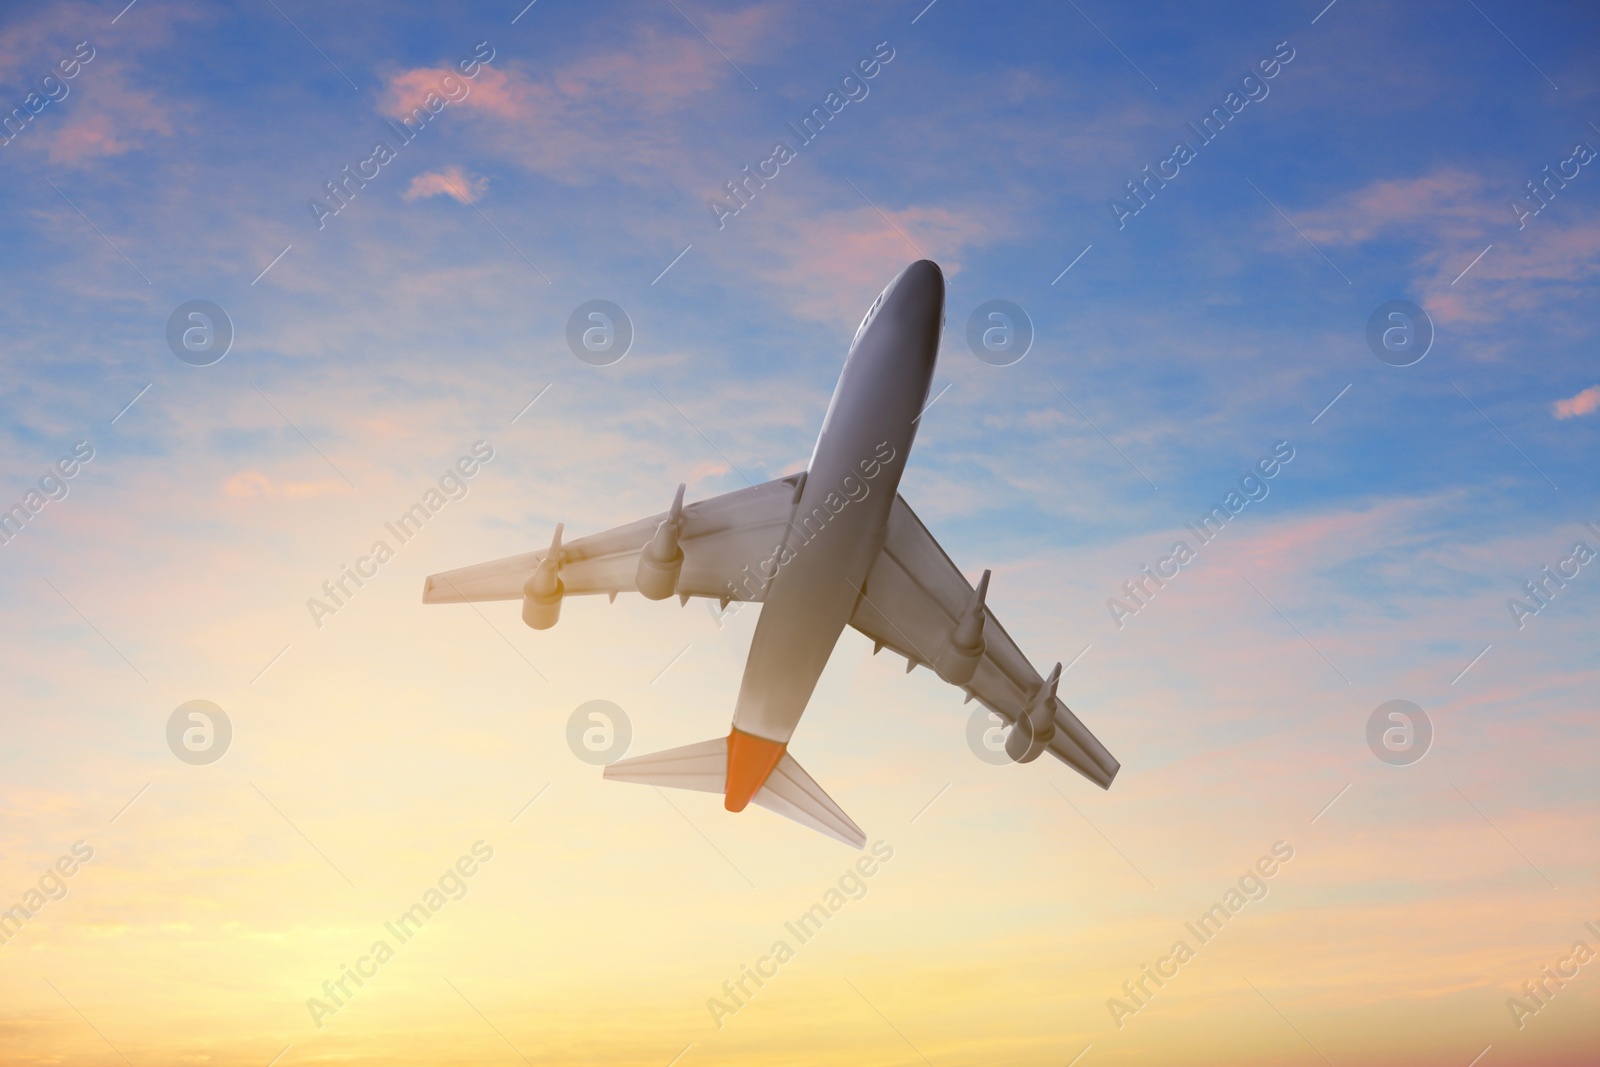 Image of Airplane flying in cloudy sky at sunset. Air transportation